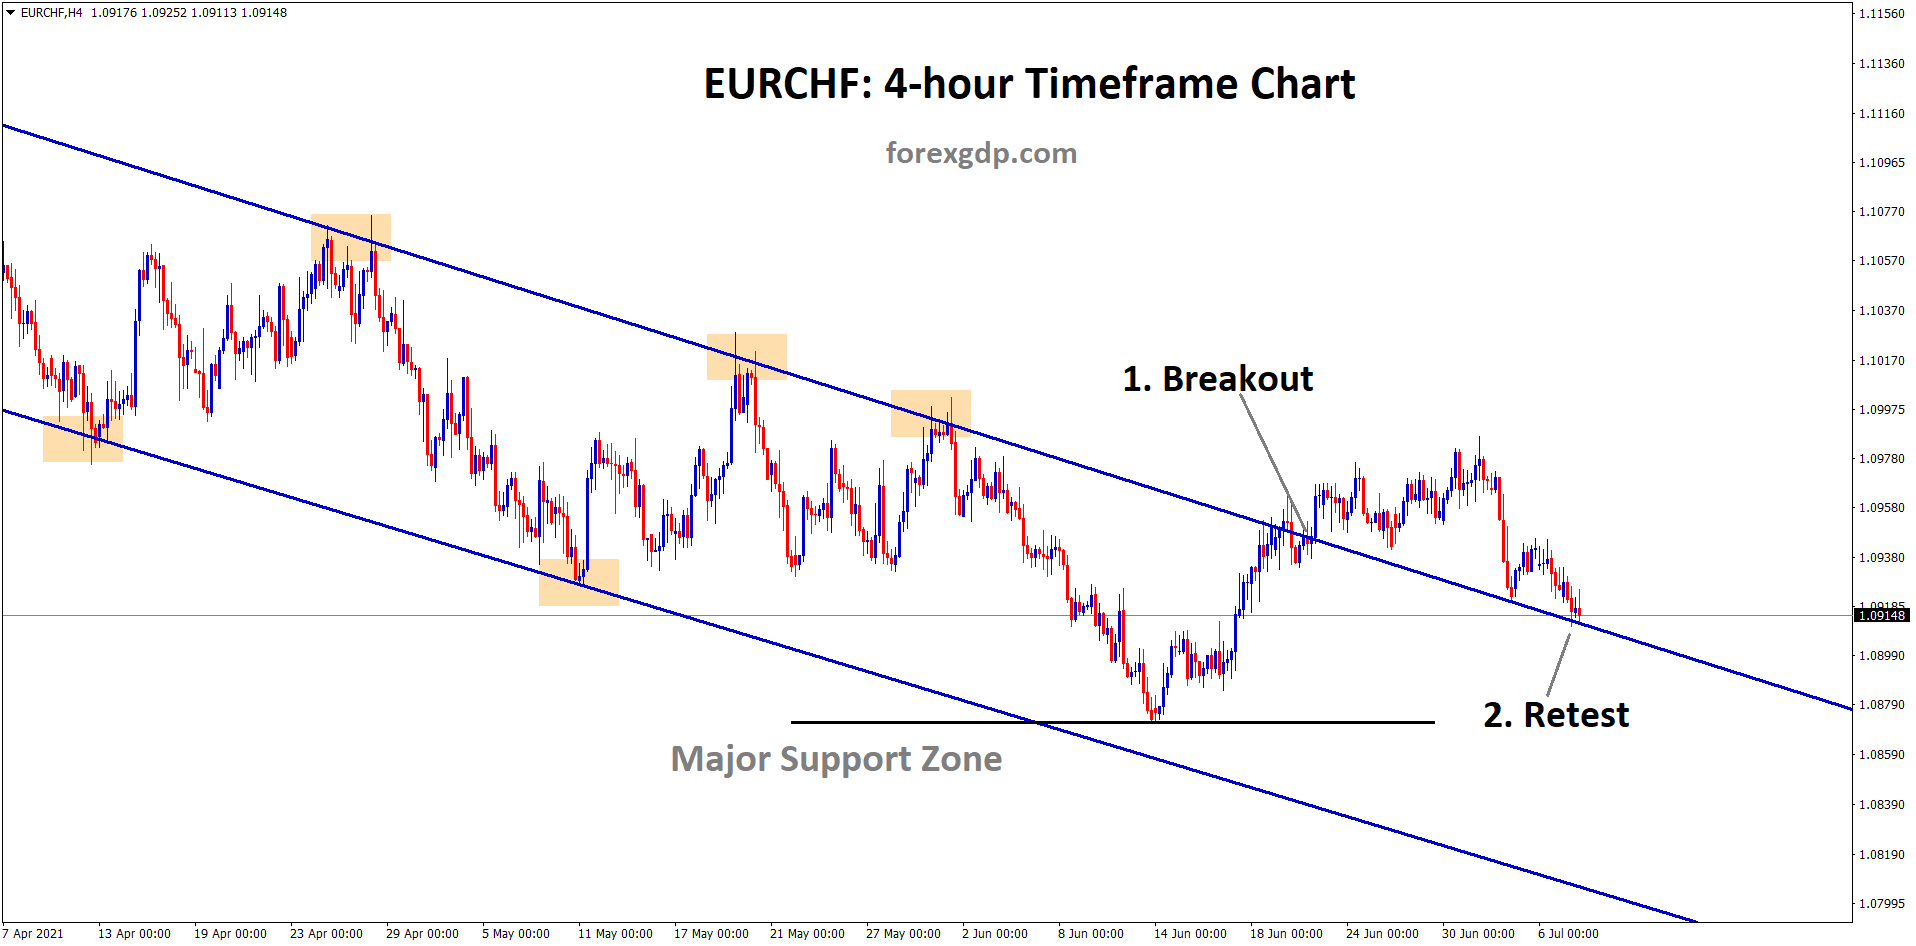 eurchf breakout and retest in the channel line